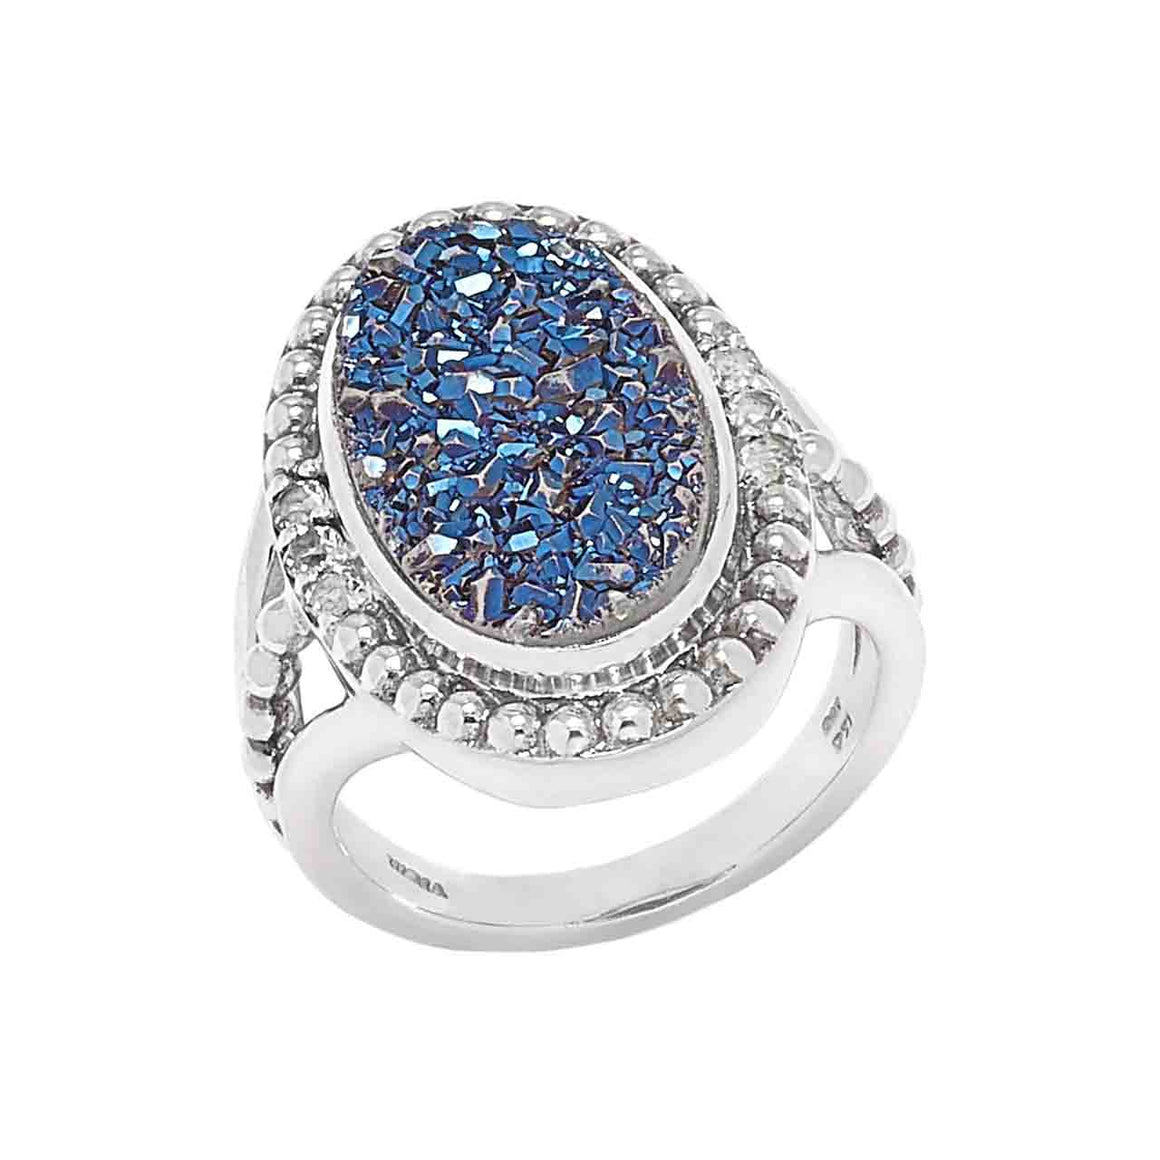 Blue Drusy and Blue Topaz 7 Stone Ring